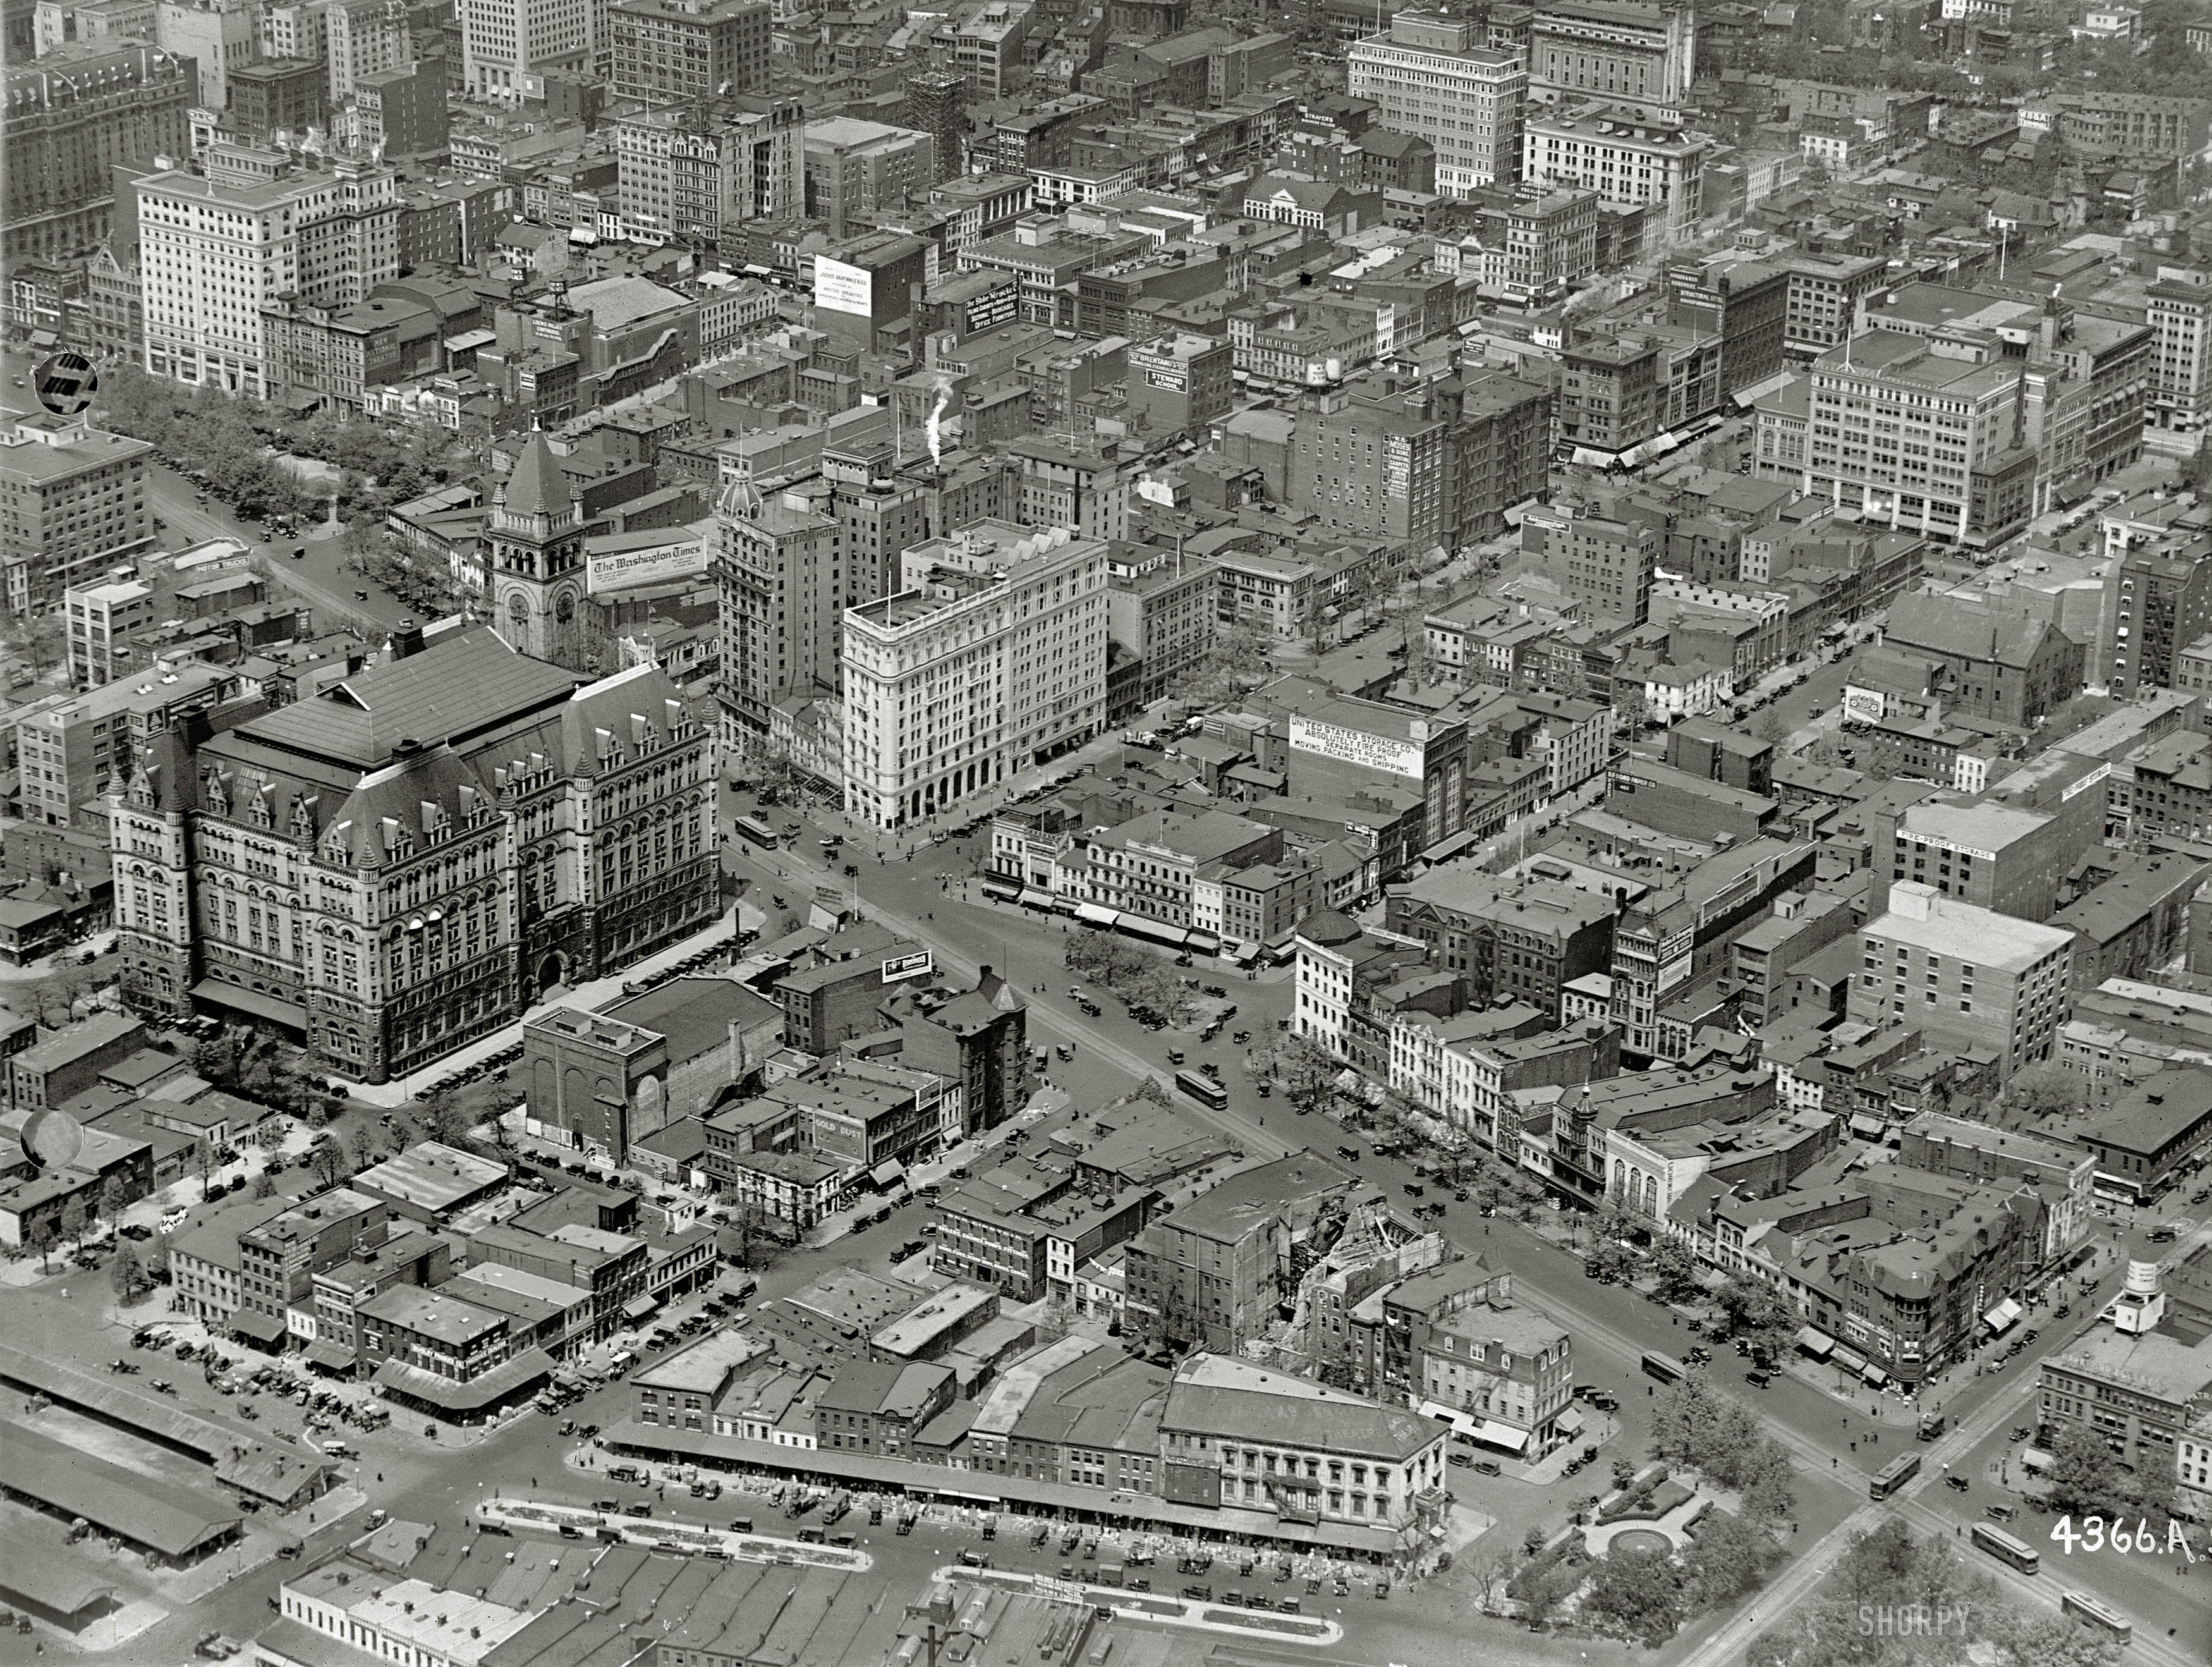 Washington, D.C., circa 1922. "Star Building from air." The Washington Star newspaper building at the center is at the intersection of 11th Street N.W. and Pennsylvania Avenue, which runs diagonally across the photo. The big building with the tower us the Old Post Office. There's a lot to see here, including laundry hung out to dry. National Photo Company glass negative. View full size.